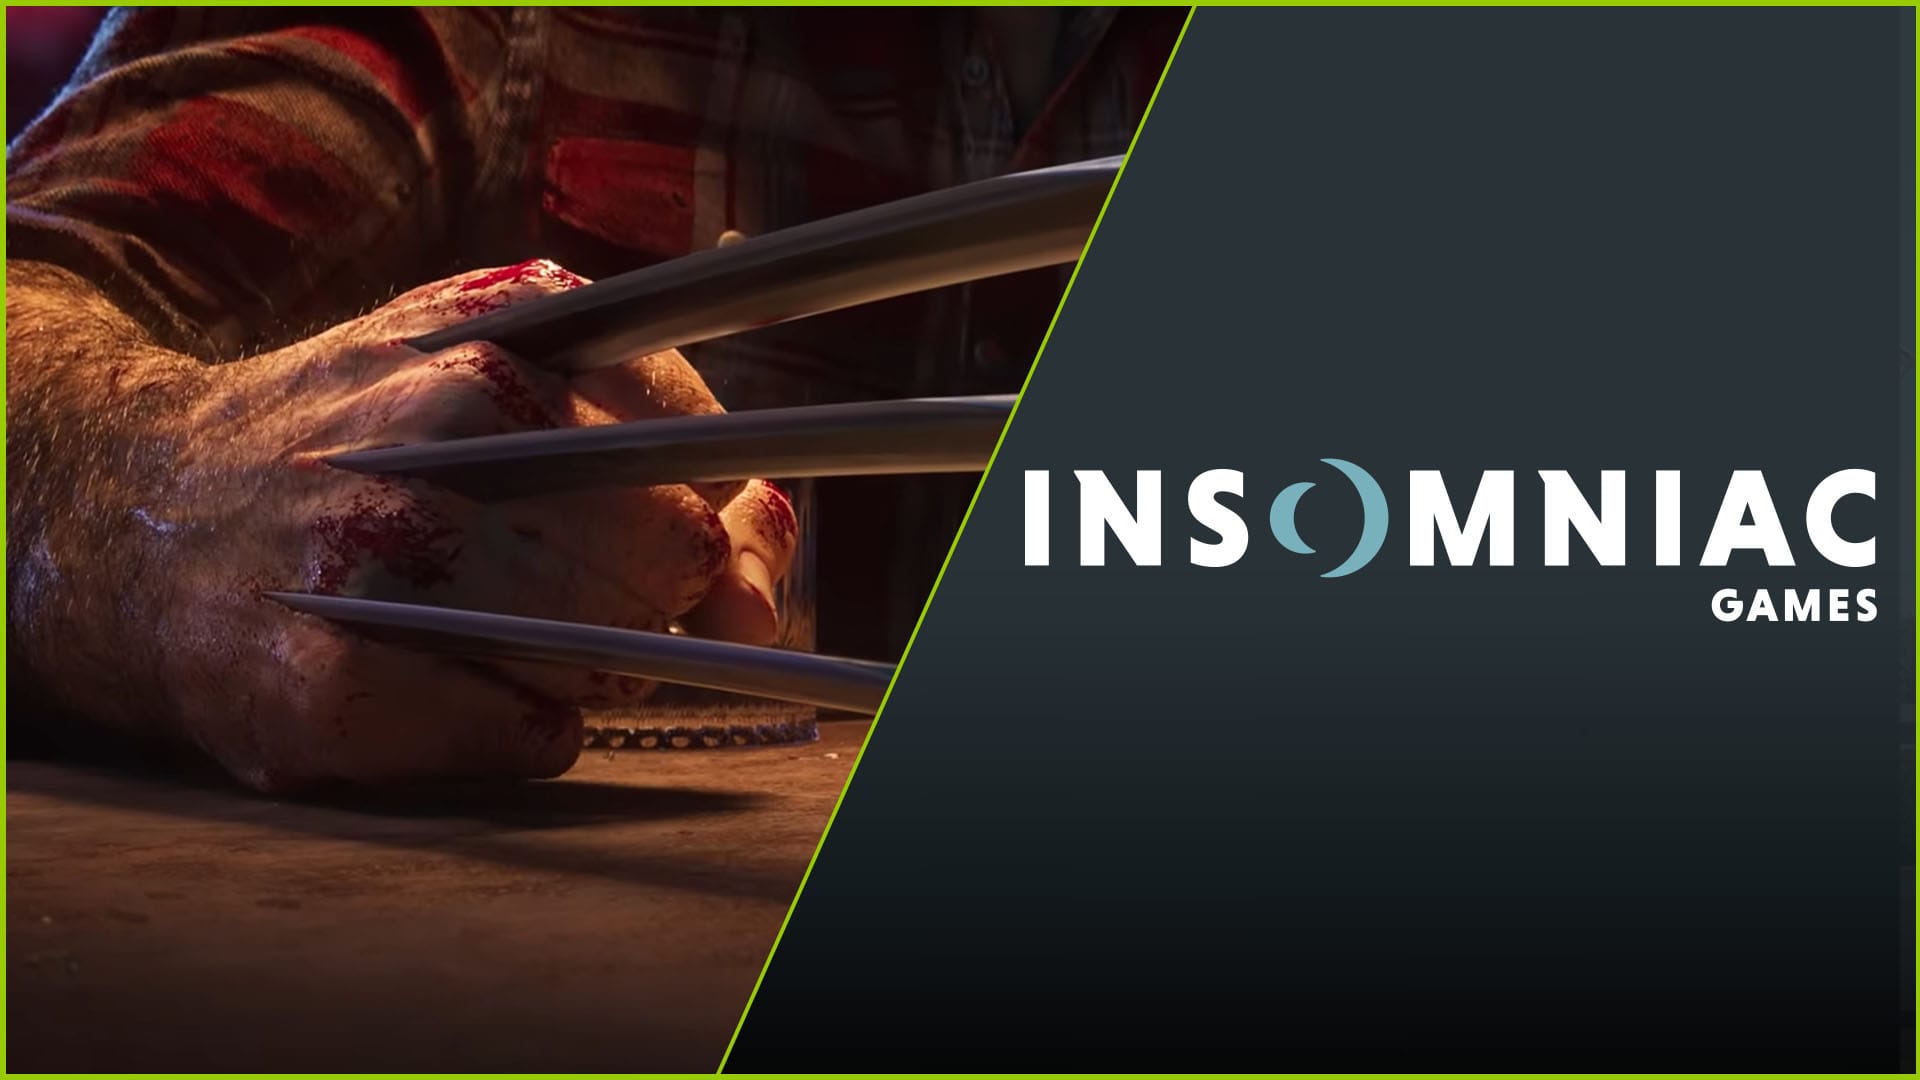 Insomniac Games Officially Reacts to “Criminal Cyberattack,” Marvel’s Wolverine Will Greatly Evolve